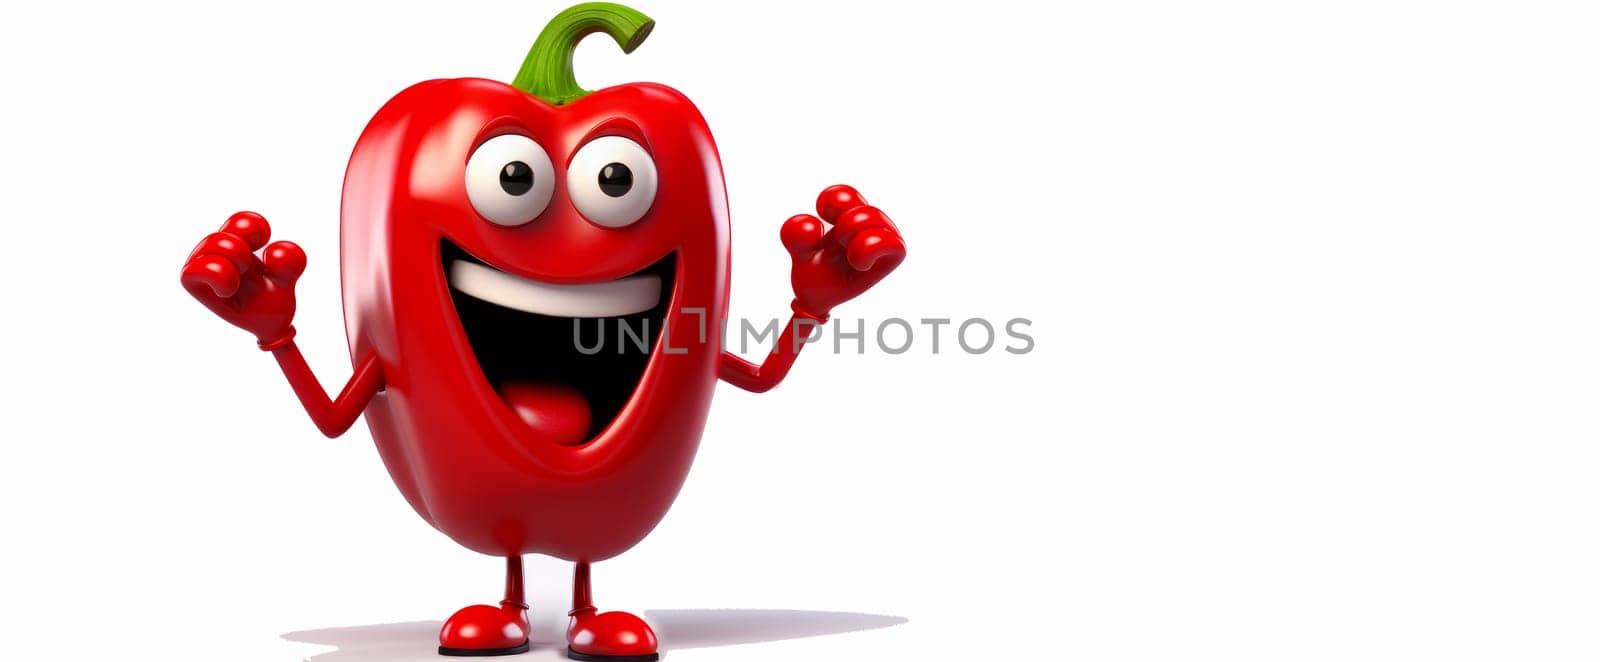 Red pepper with a cheerful face 3D on a white background. Cartoon characters, three-dimensional character, healthy lifestyle, proper nutrition, diet, fresh vegetables and fruits, vegetarianism, veganism, food, breakfast, fun, laughter, banner